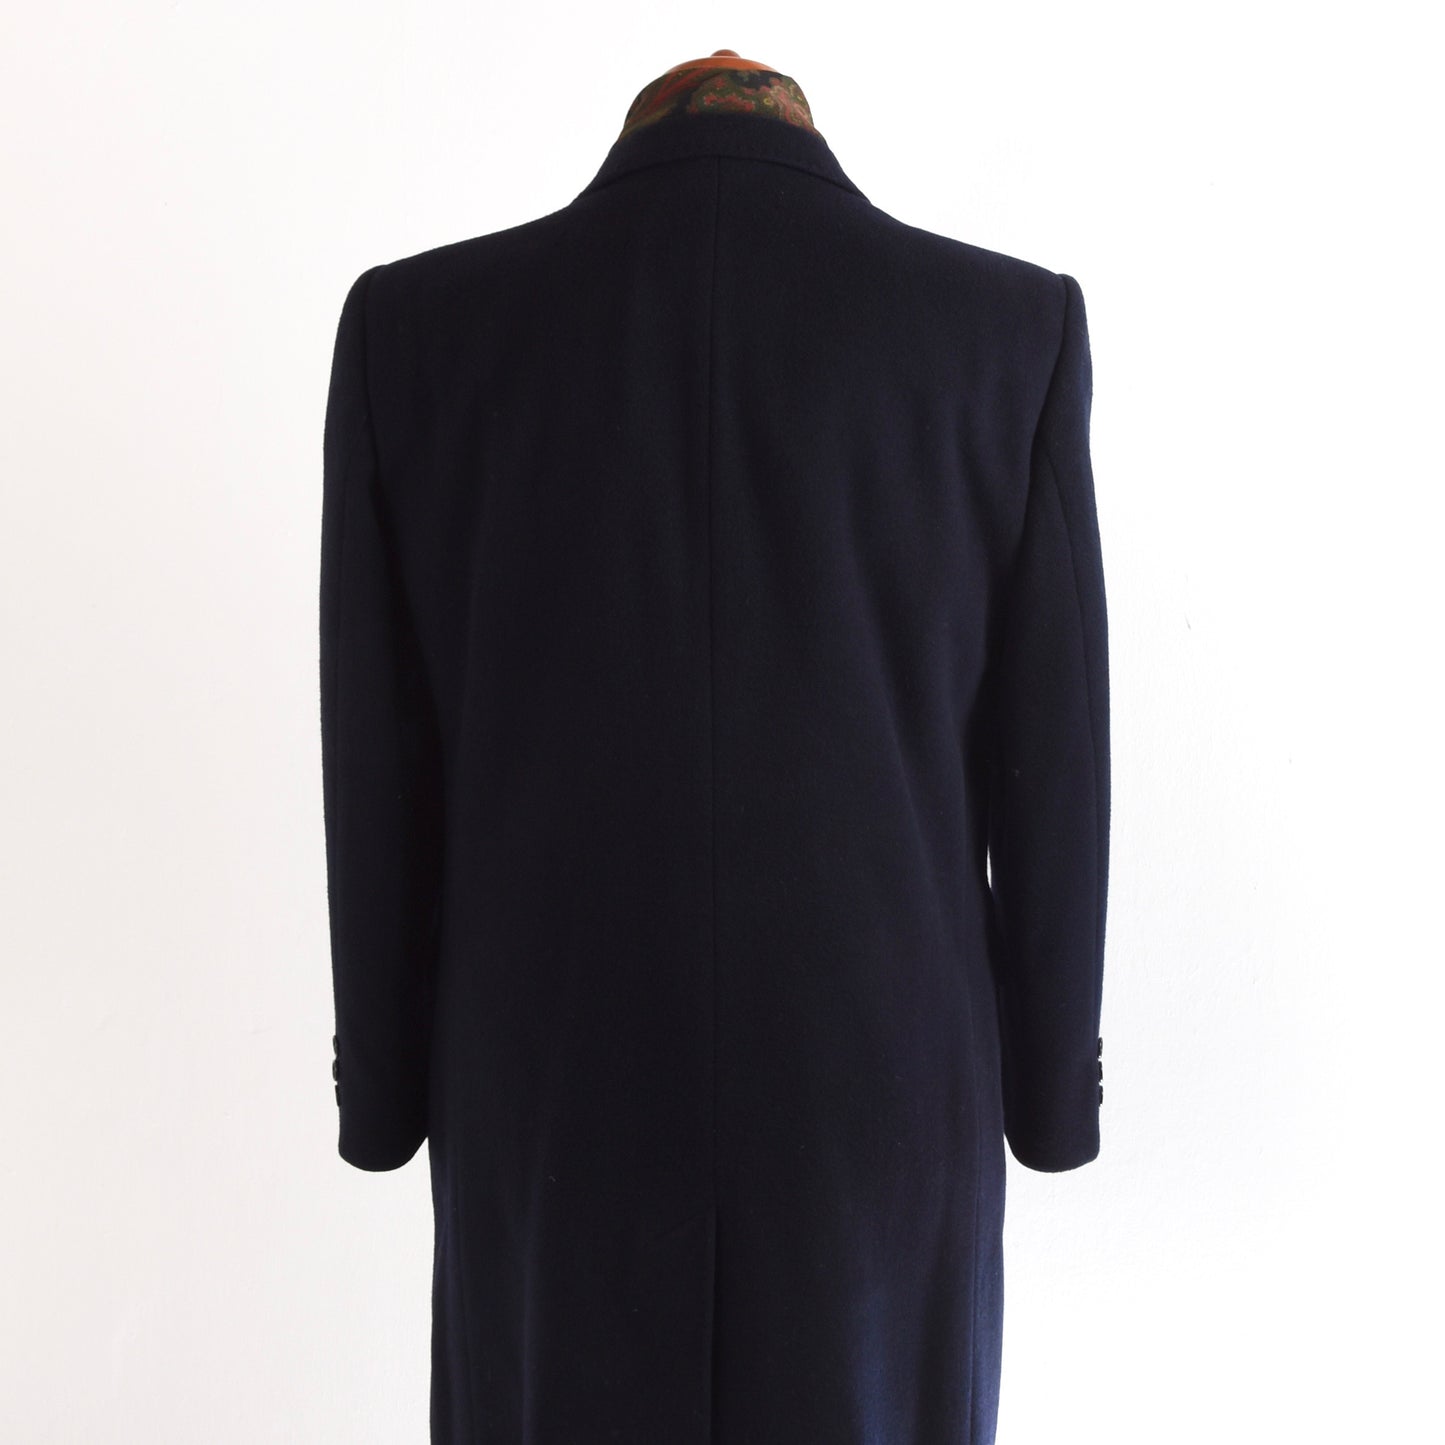 A'Mana Wool-Cashmere Double-Breasted Peak Lapel Coat Size 46 - Navy Blue